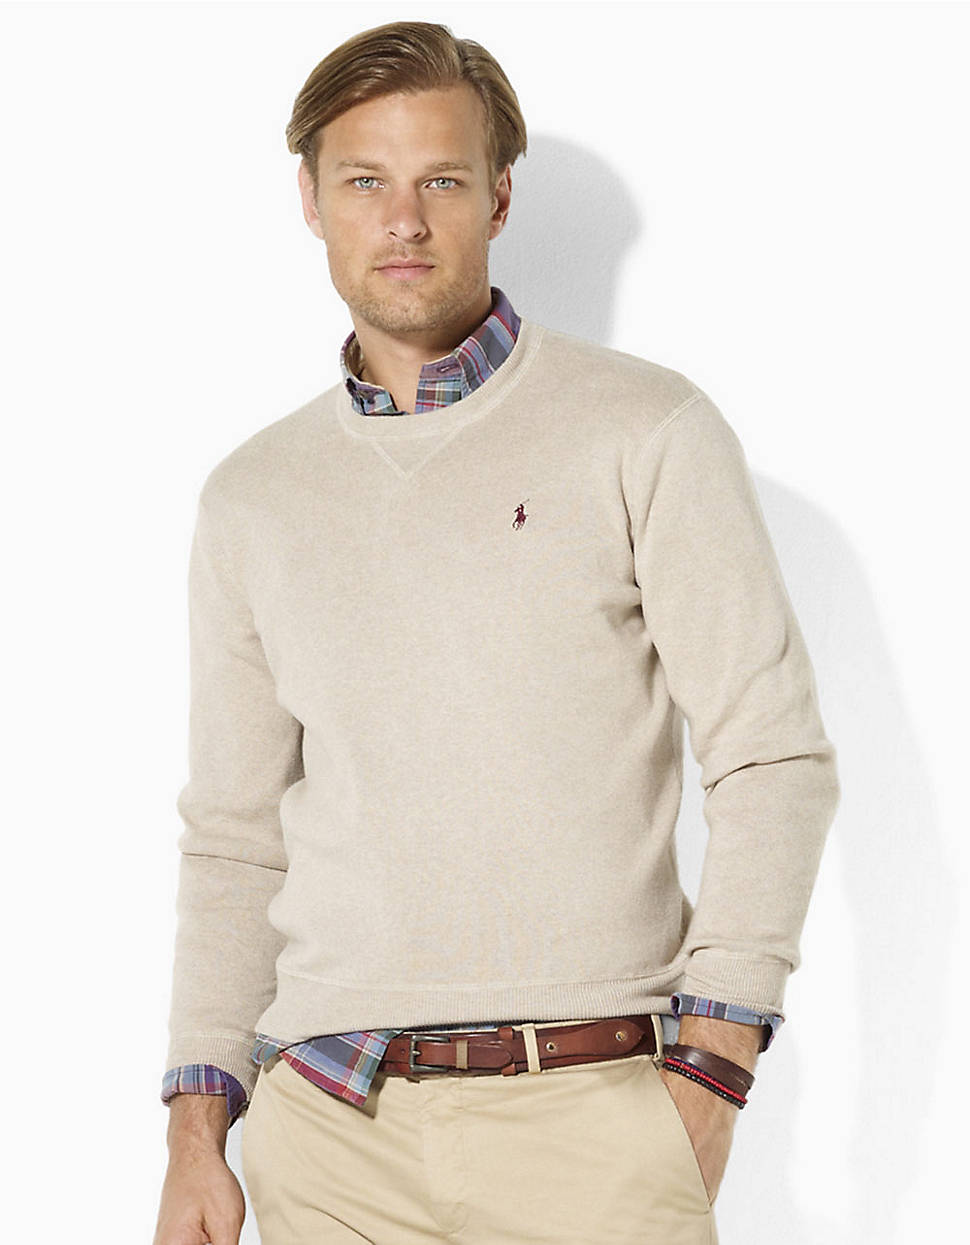 Polo ralph lauren Long Sleeved Combed Cotton Crewneck Sweater in ...